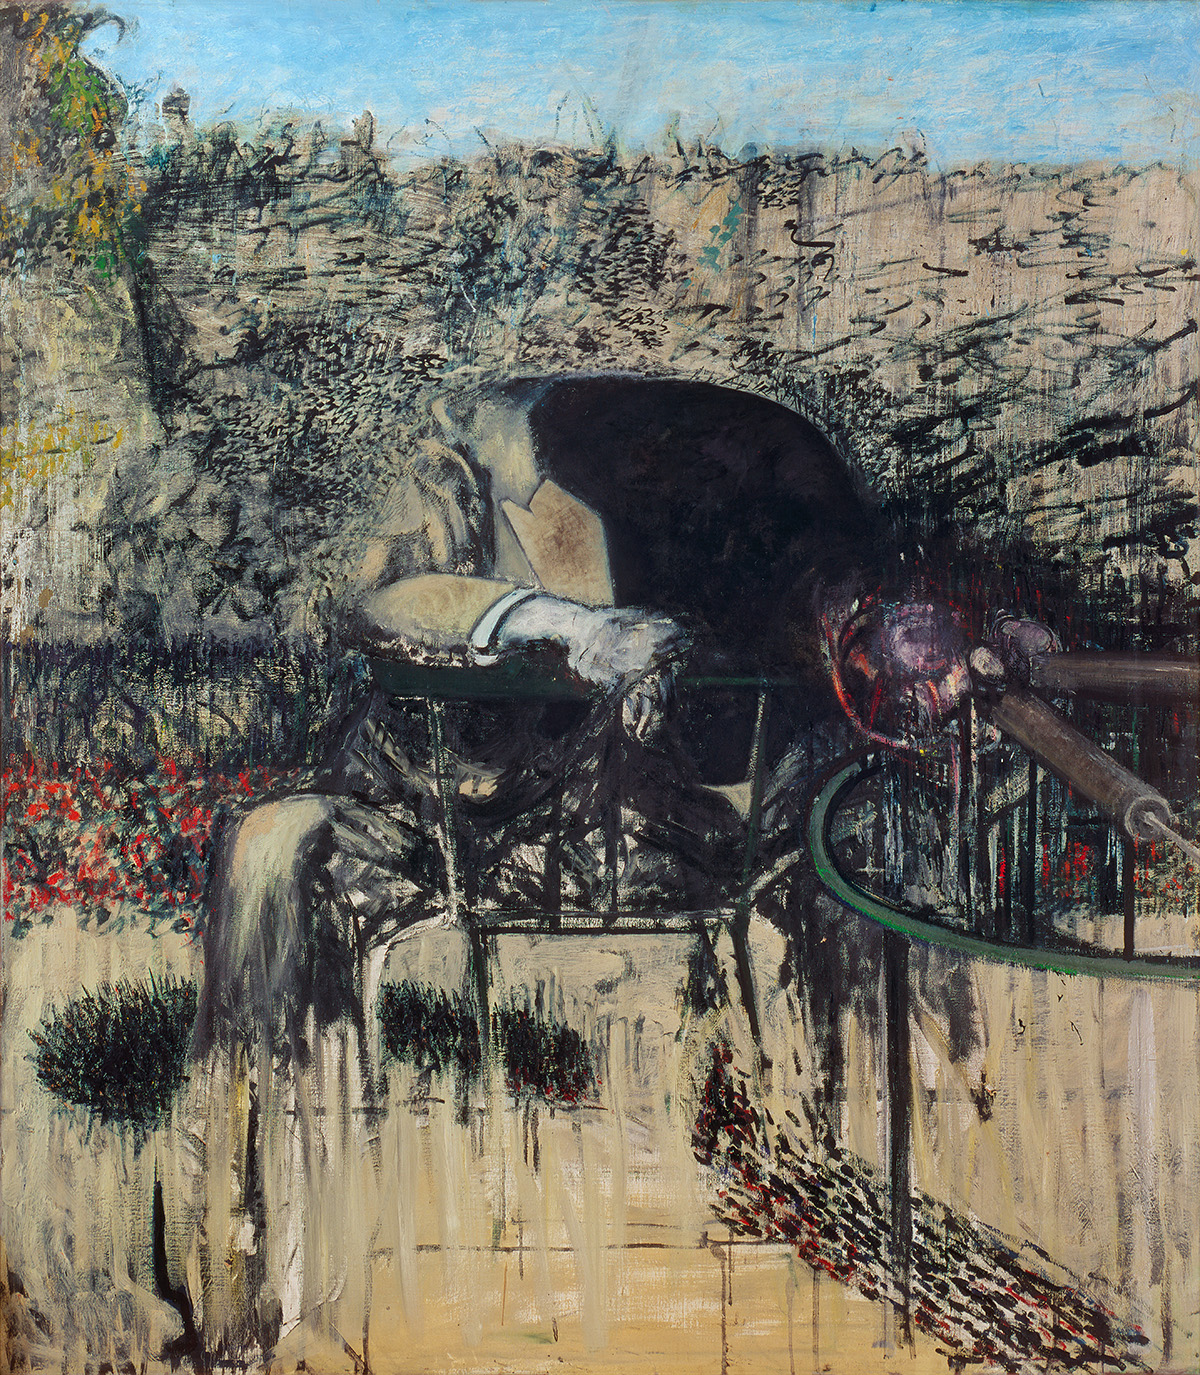 Francis Bacon, Figure in a Landscape. Oil, pastel and dust on canvas. CR number 45-05. © The Estate of Francis Bacon / DACS London 2020. All rights reserved.